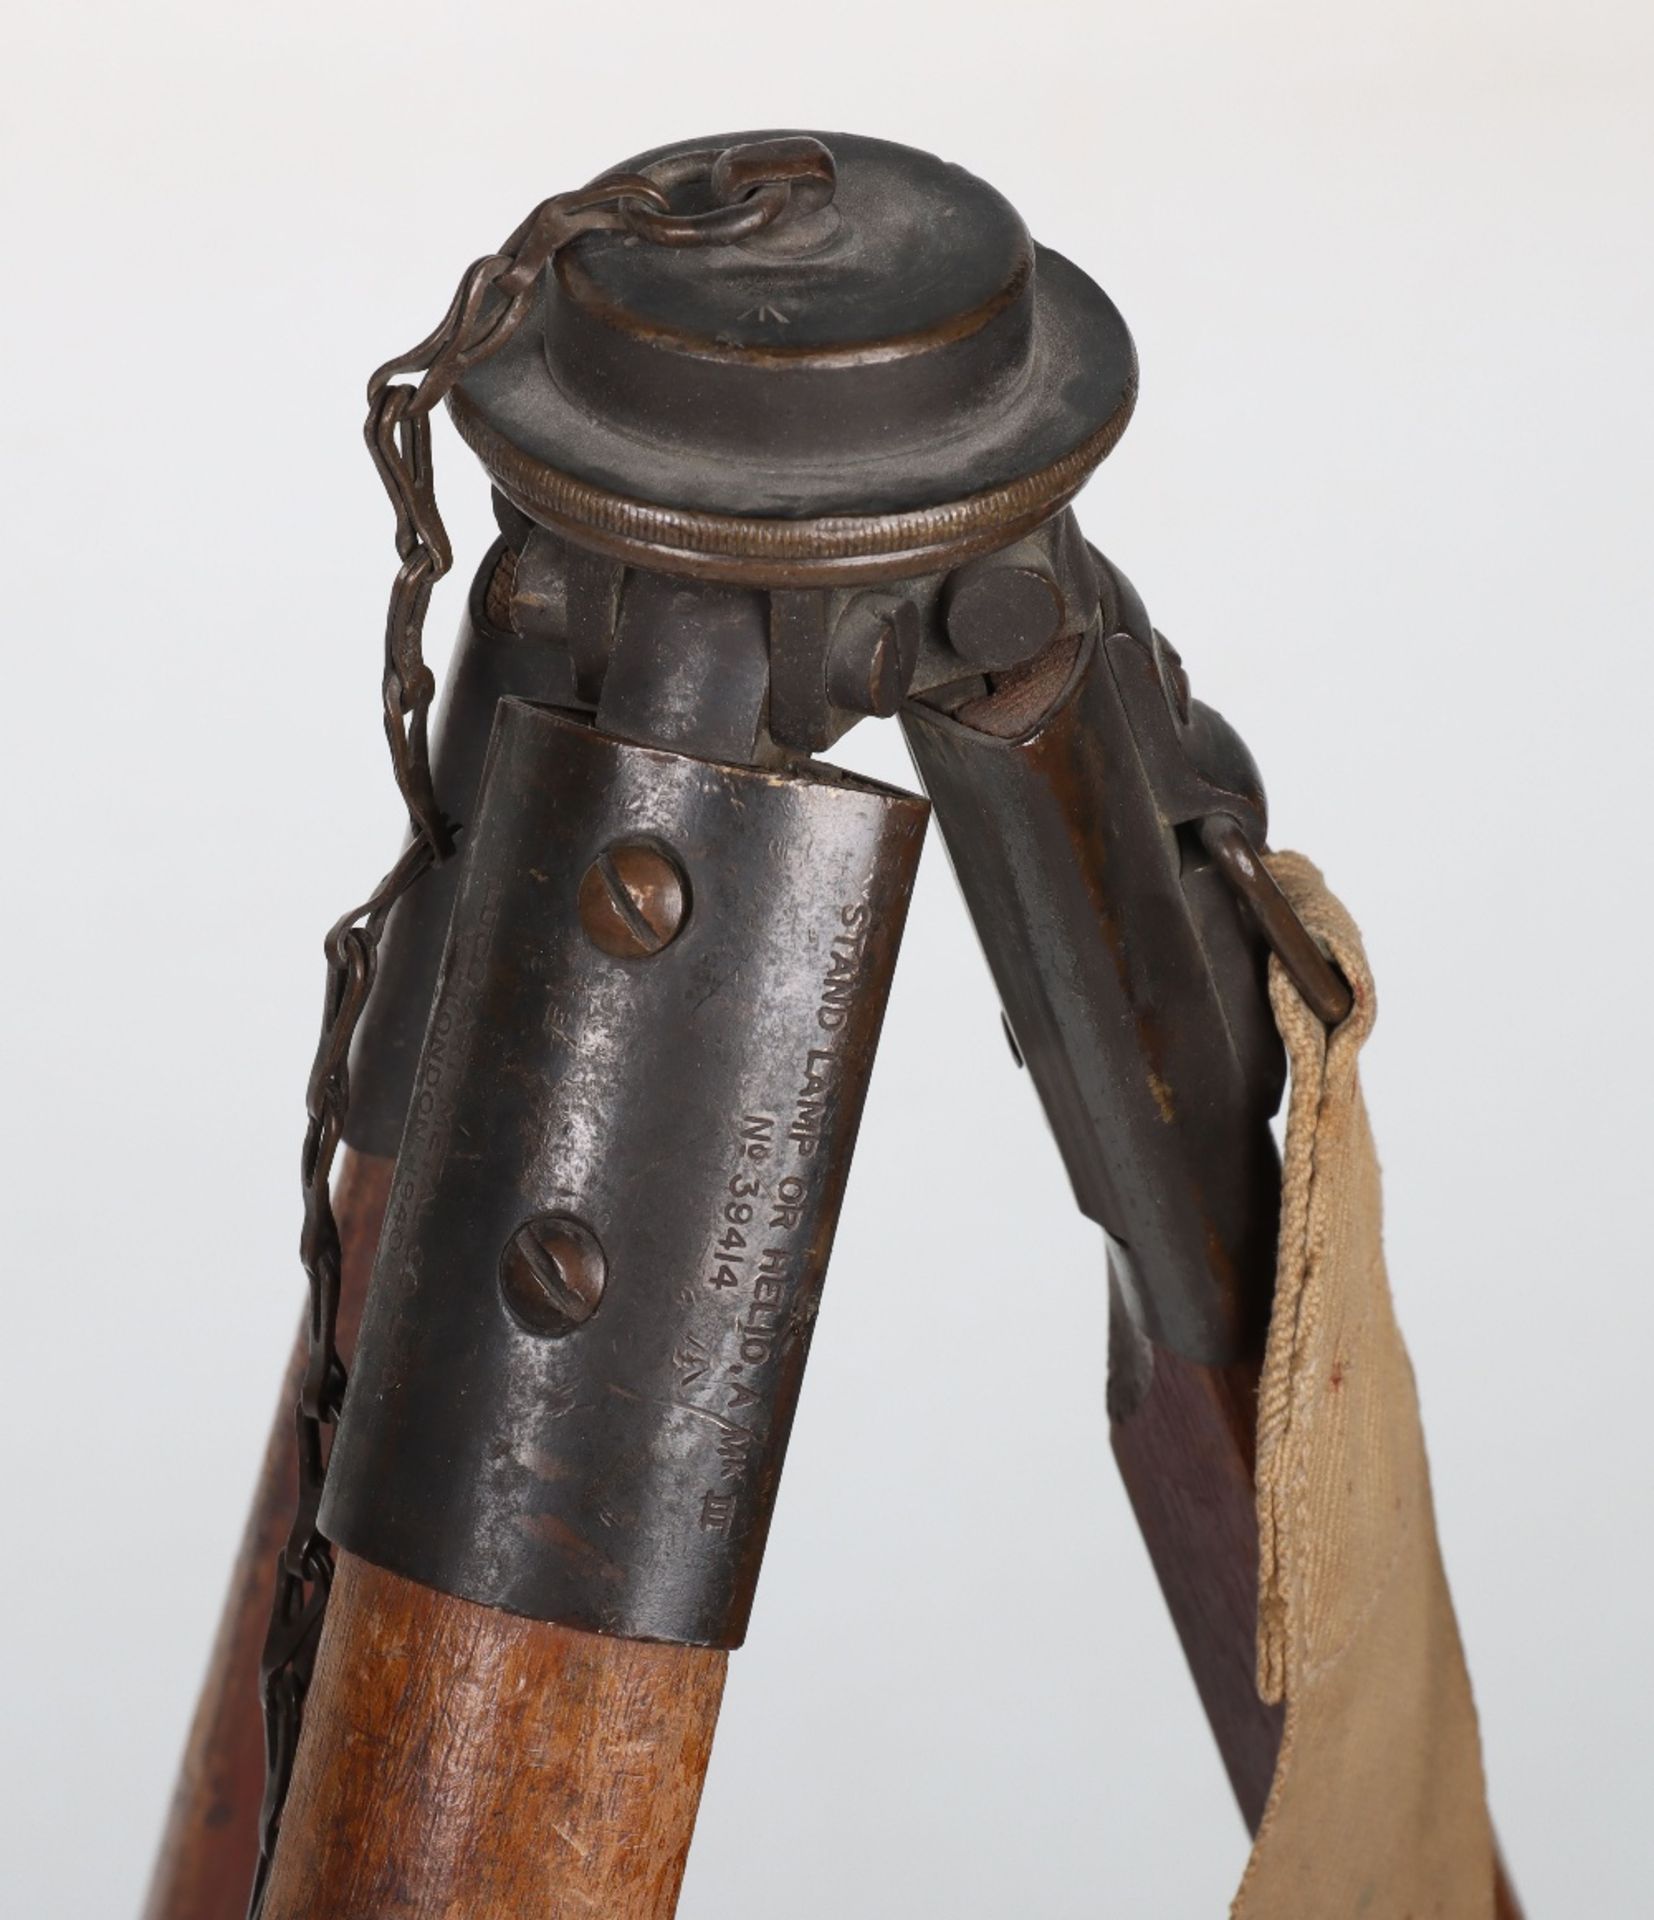 Wooden Tripod Stand for Signalling Lamp or Heliograph - Image 4 of 5